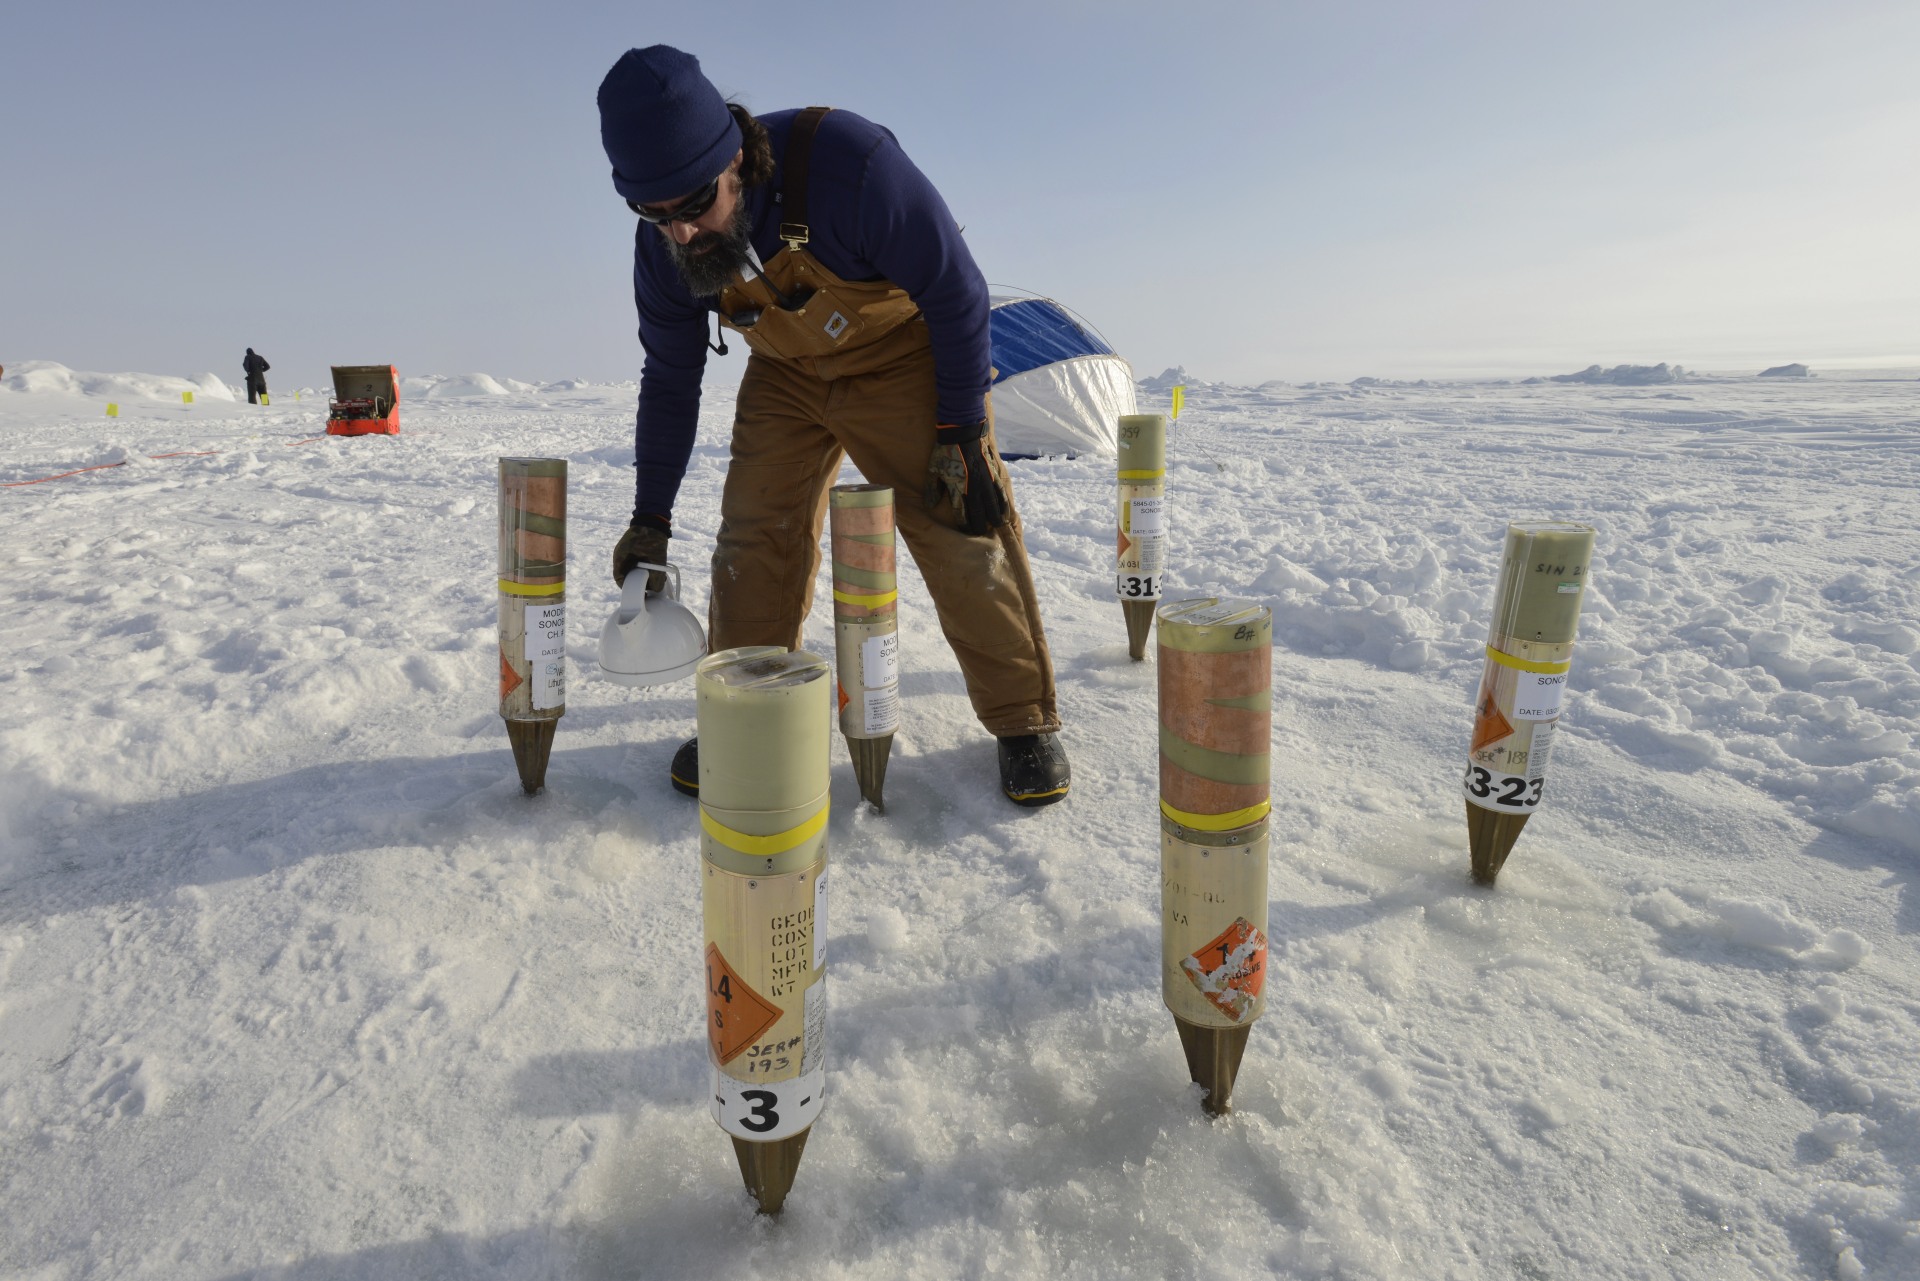 Watering a geobuoy garden. The buoys were inserted with the entire icepick embedded in the holes, then a slurry of ice and water was poured around the holes and allowed to freeze, coupling the geobuoys to the ice in a controlled manner.
Photo by Janice Lang, DRDC 
